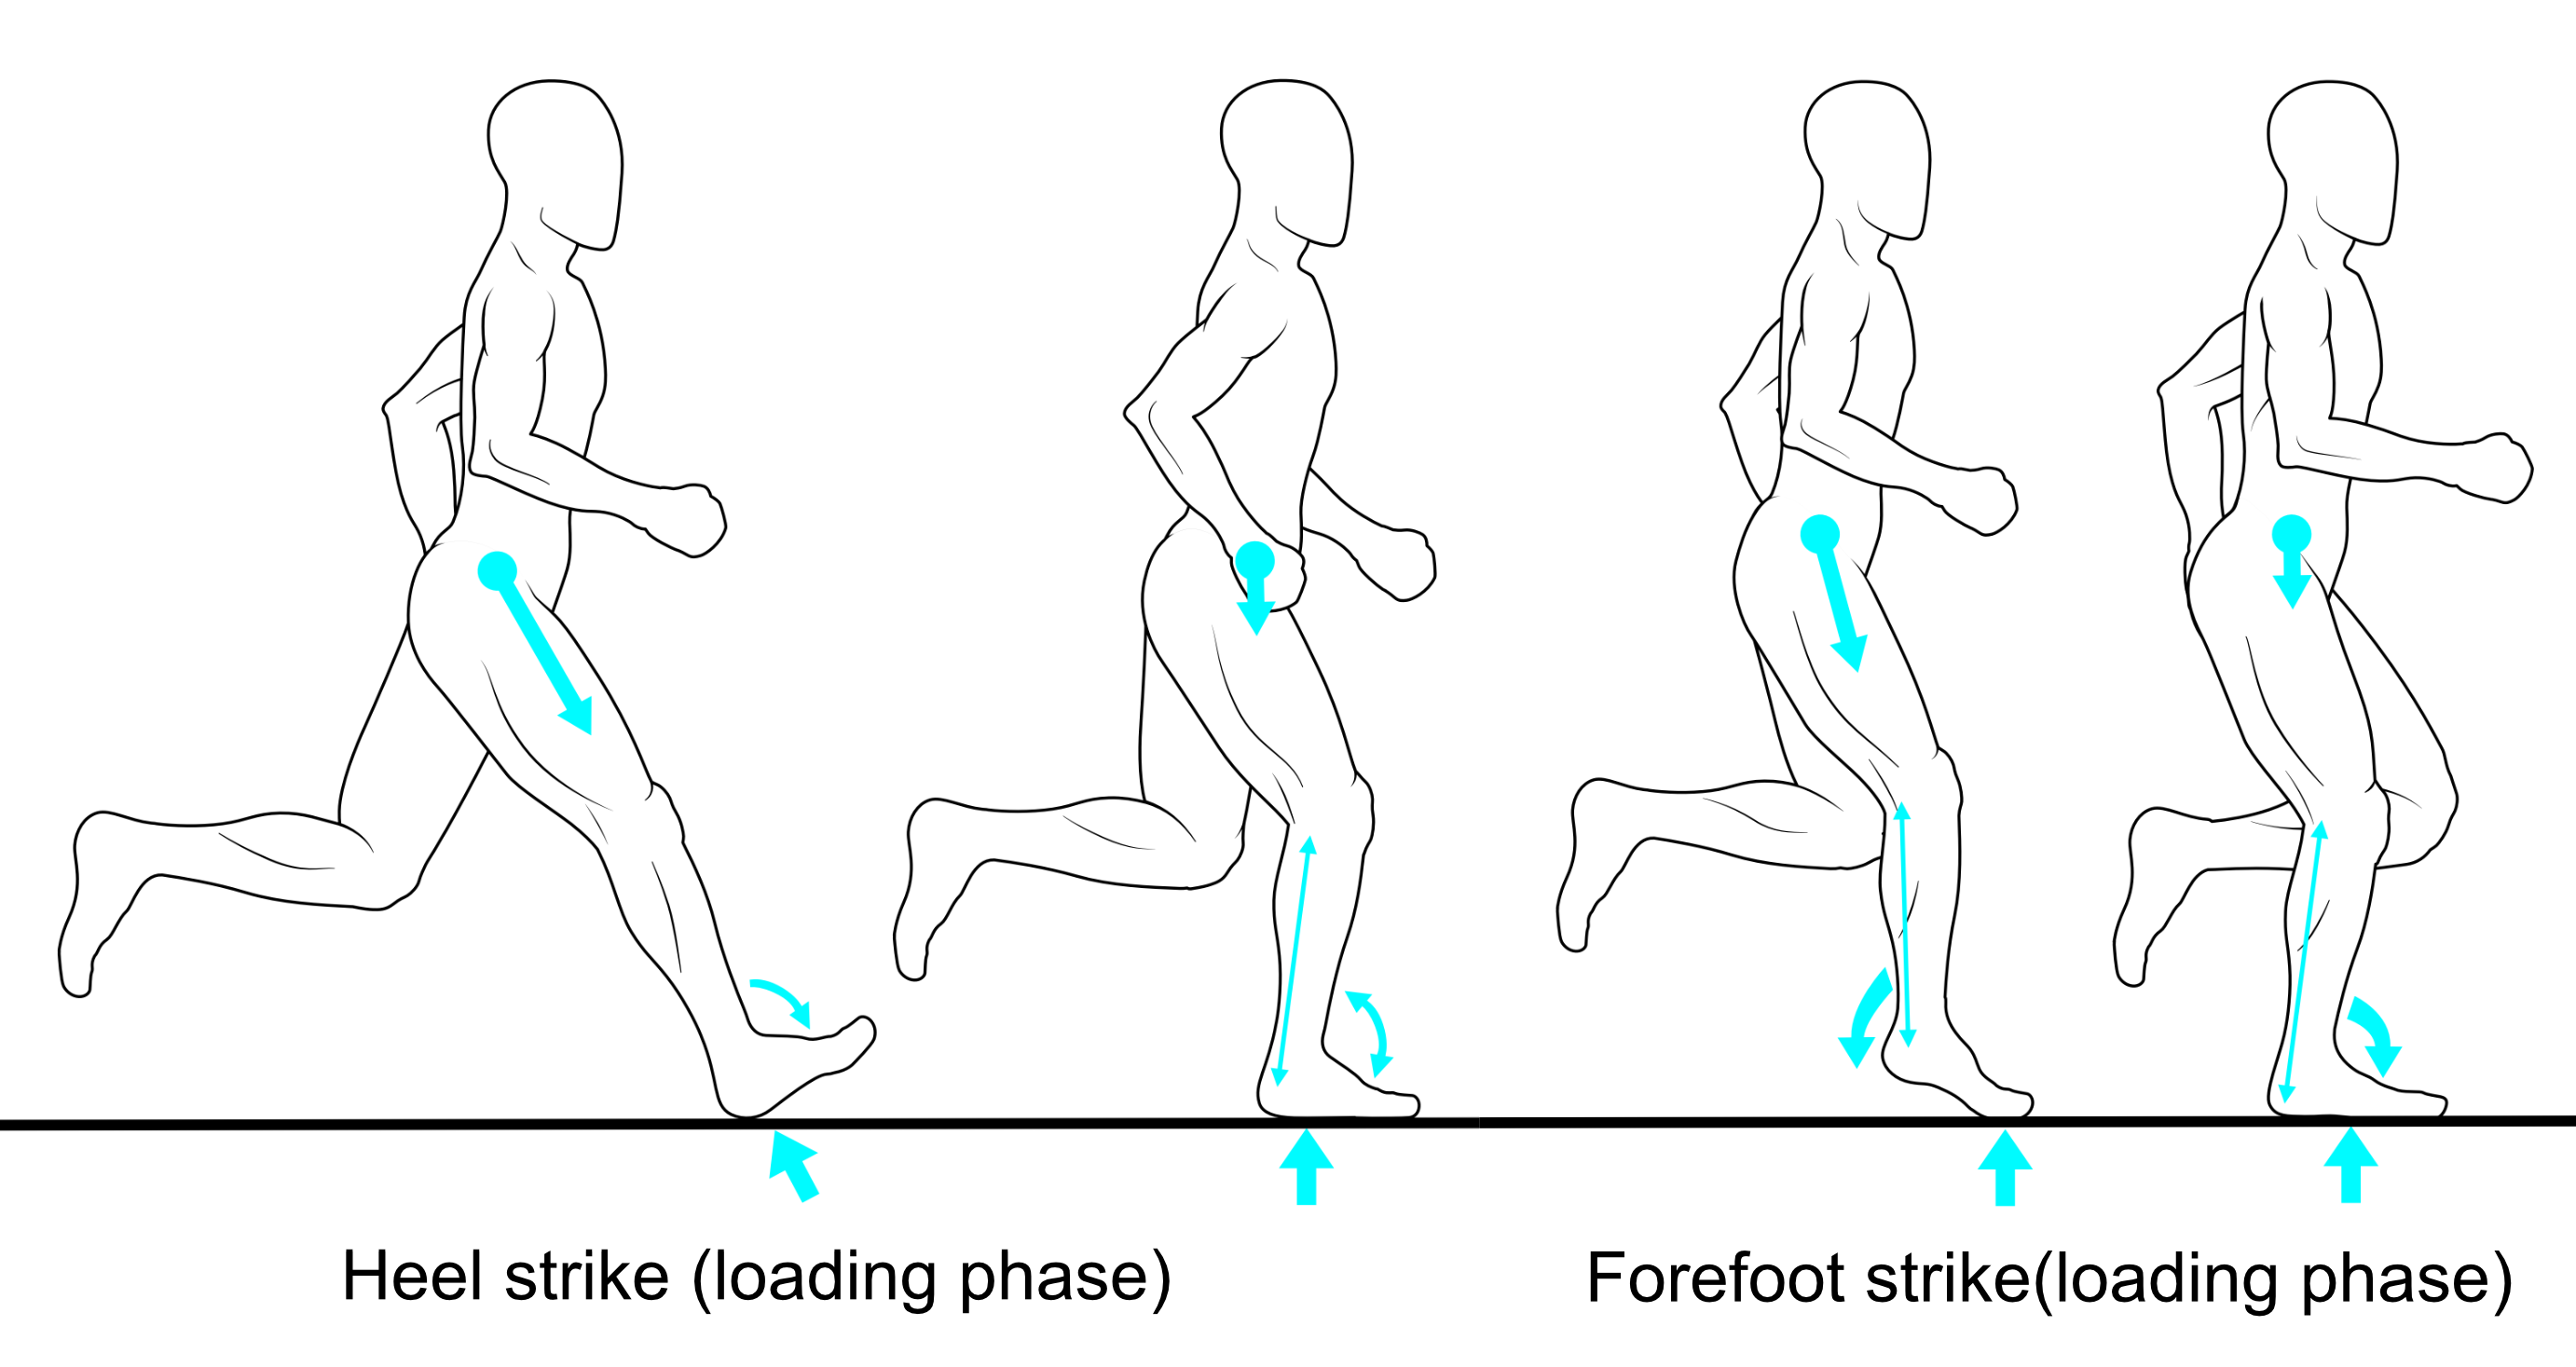 I. Introduction to Foot Strike